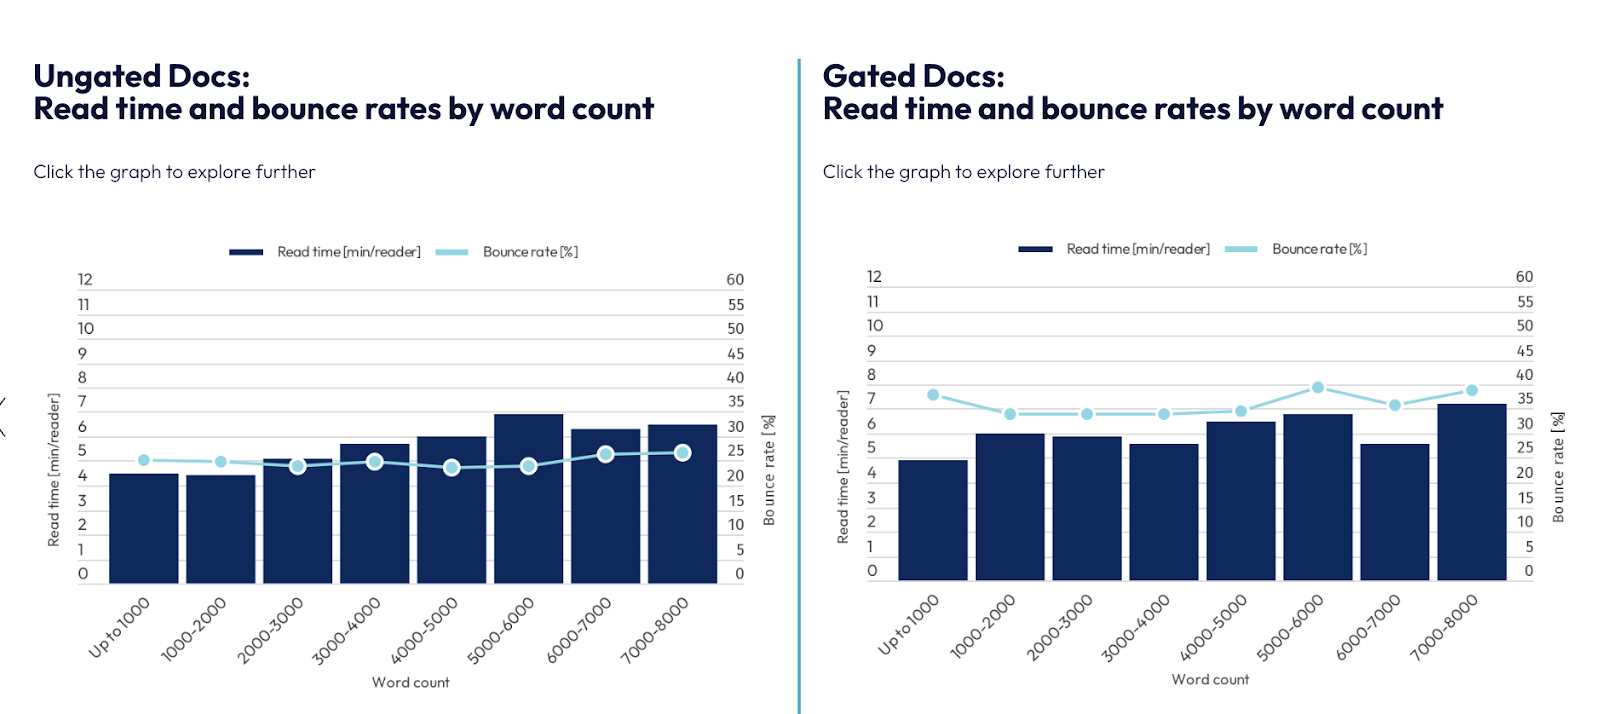 Screenshot from the linked report showing the comparison of gated vs ungated content marked by word count, read time, and bounce rate.